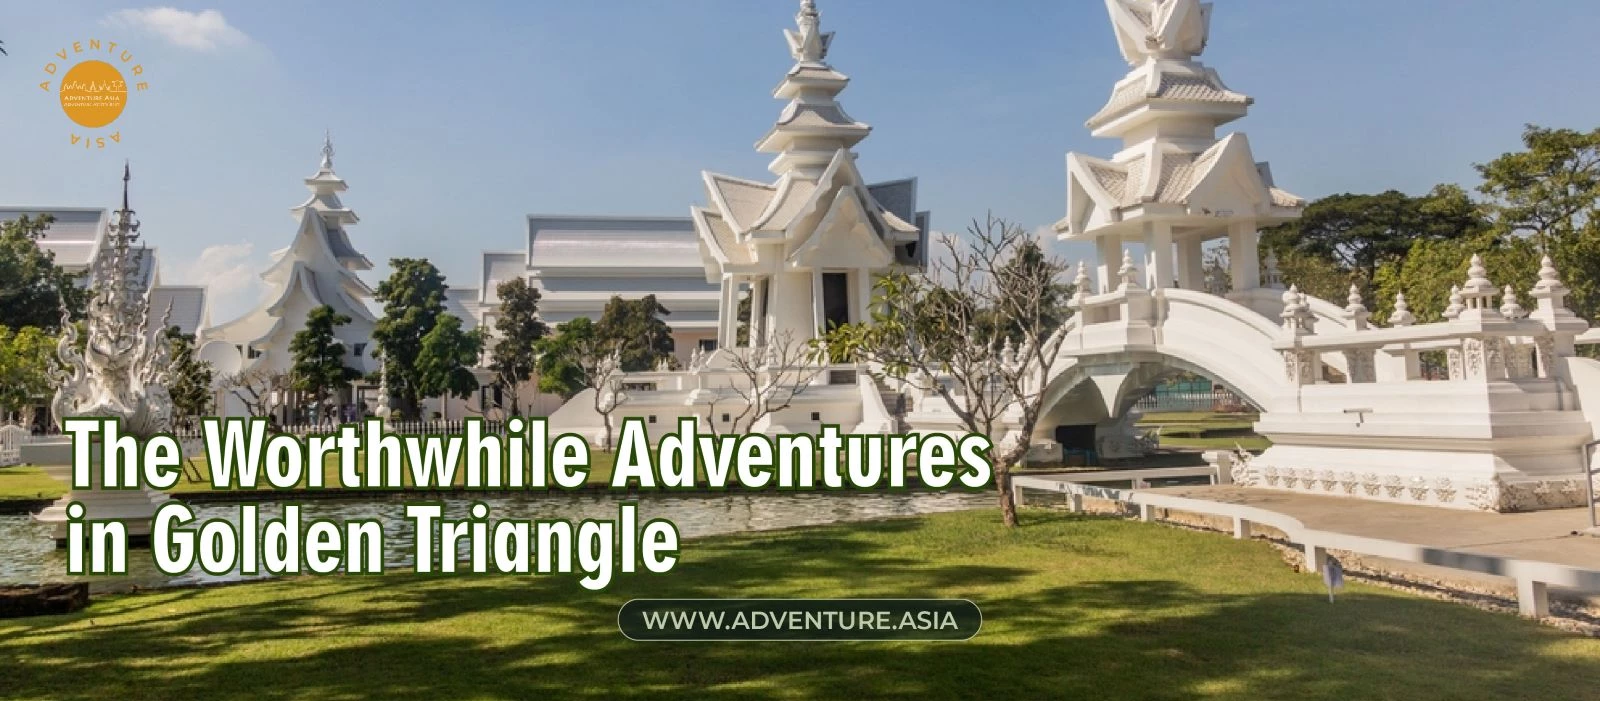 The Worthwhile Adventures That Await in Golden Triangle Thailand